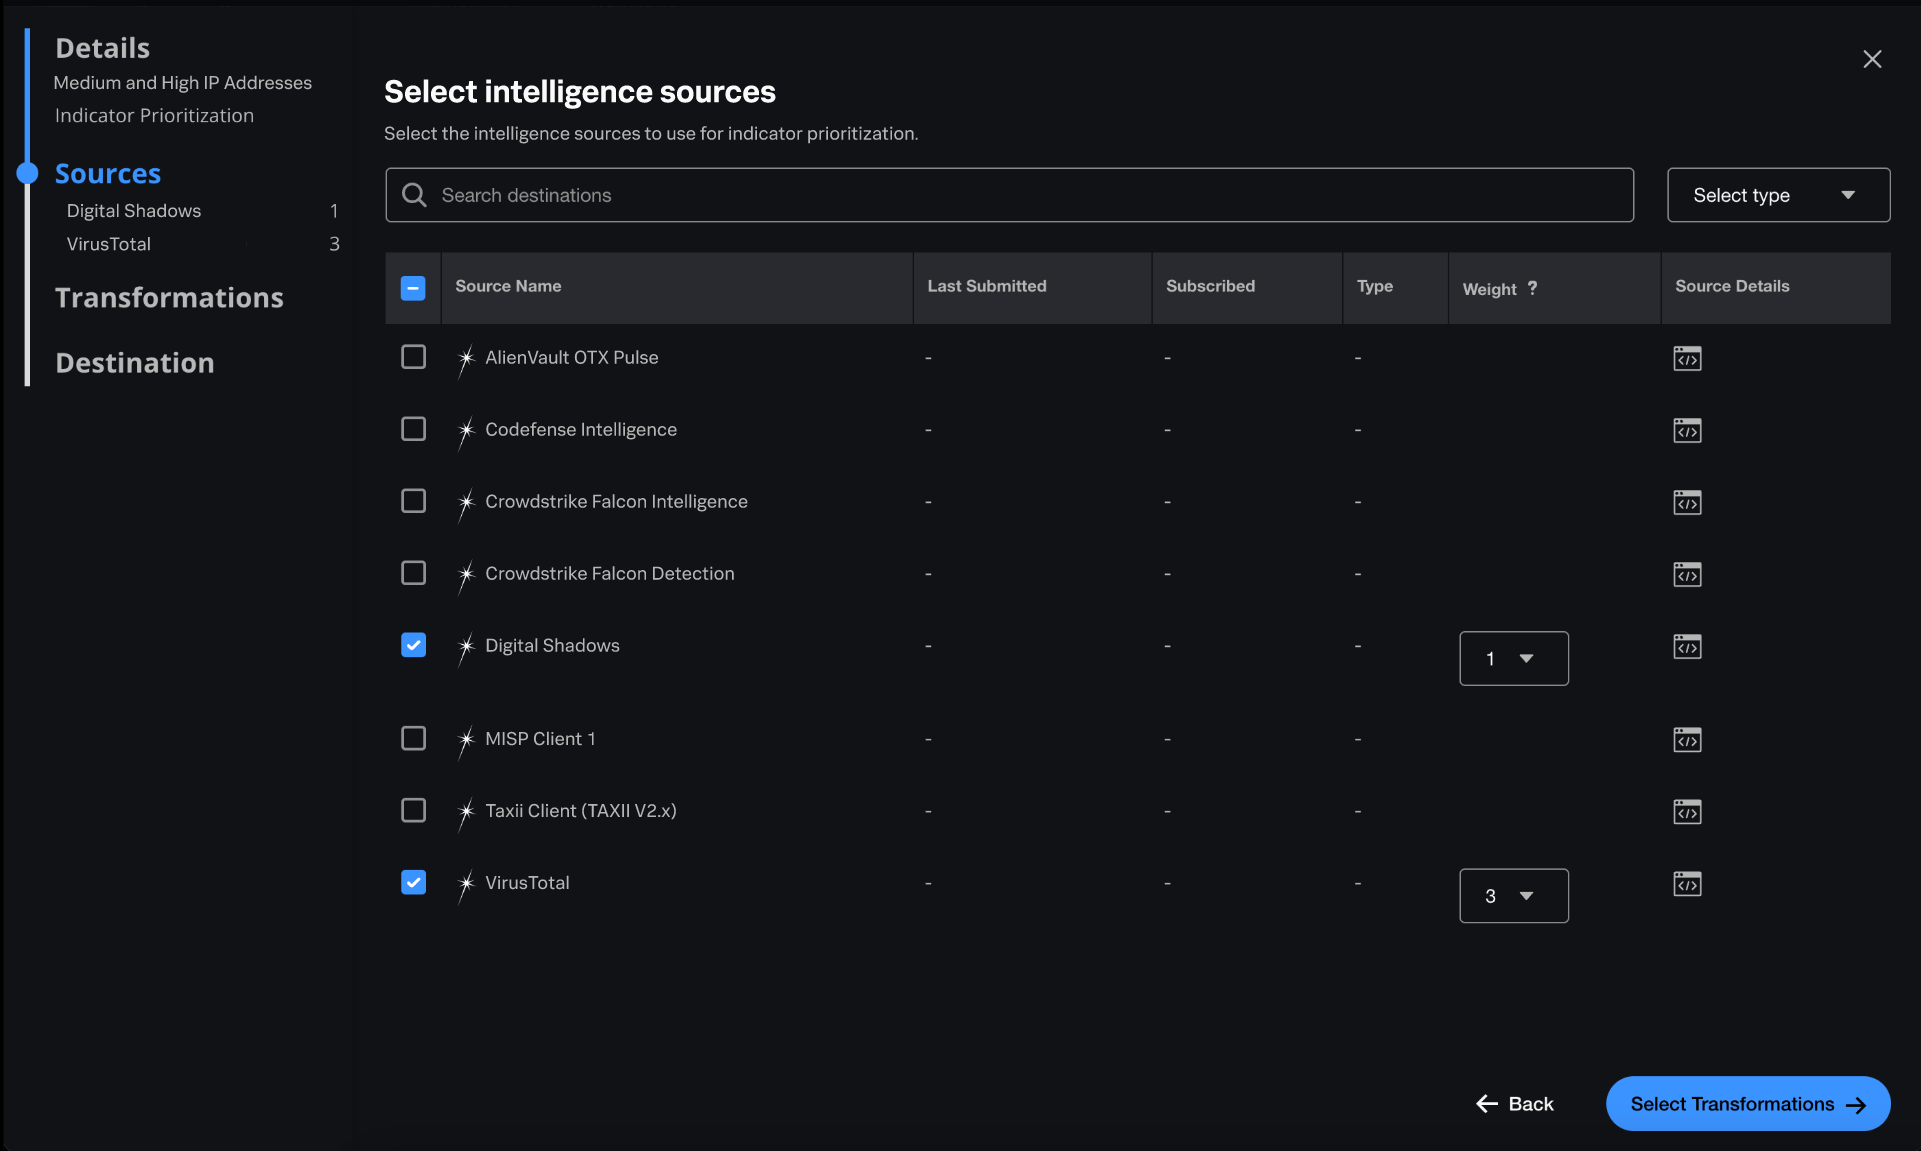 Wei selects Digital Shadows and VirusTotal as intelligence sources to normalize and prioritize the internal event data. They also give VirusTotal more weight in indicator prioritization.